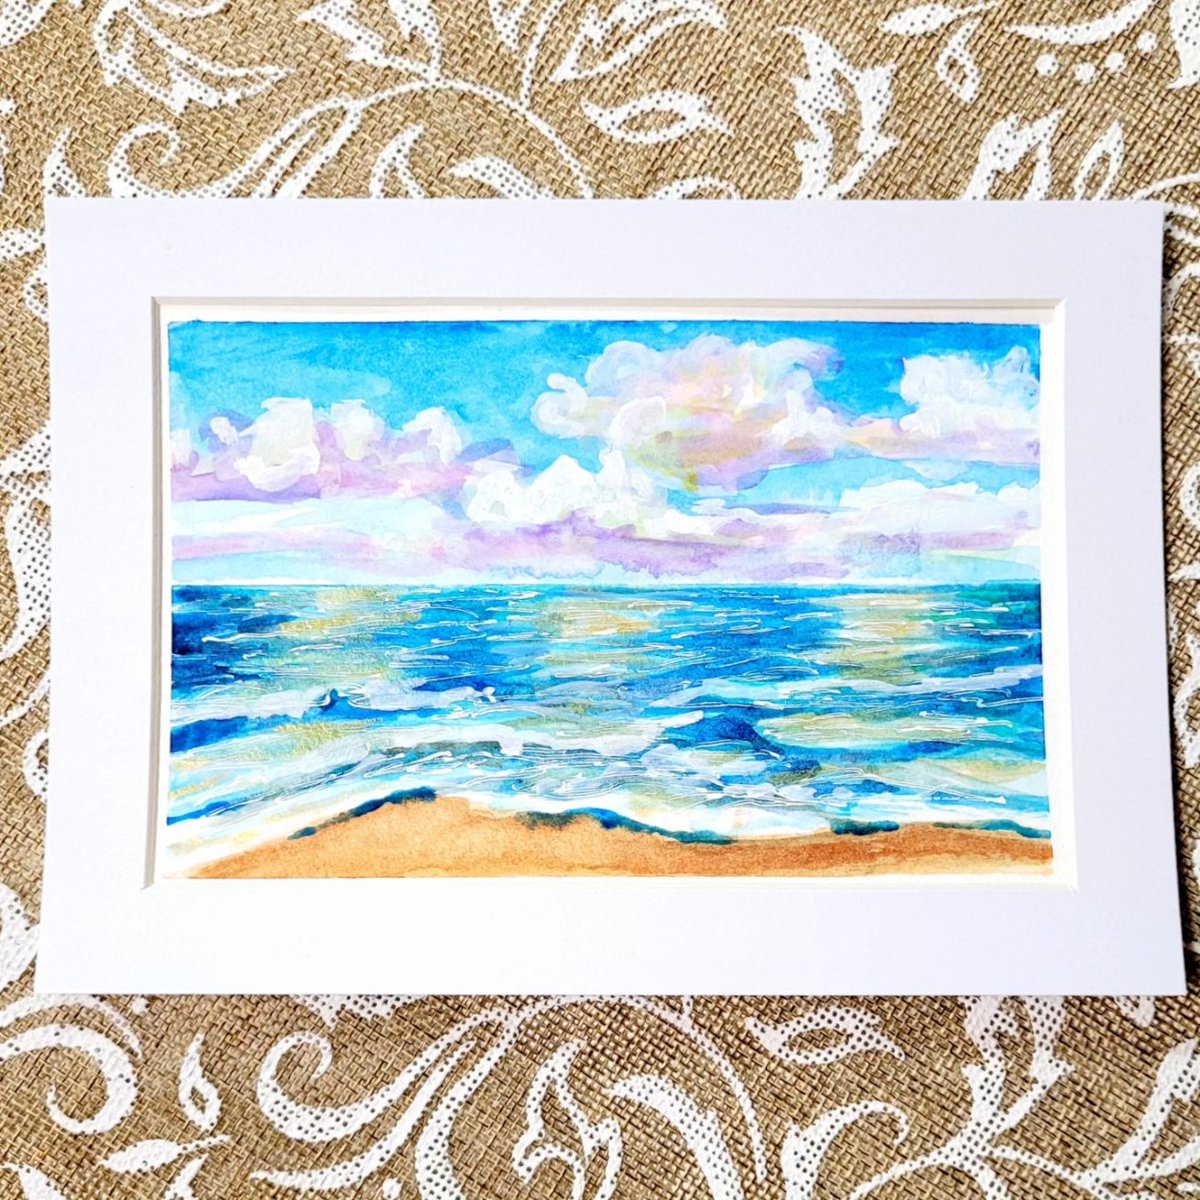 For the ocean lovers out there!
4'×6' watercolour $45 (matted to 5'×7')
#ocean #beach #beachlife #beachvibes #beachhouse #watercolour #painting #fineart